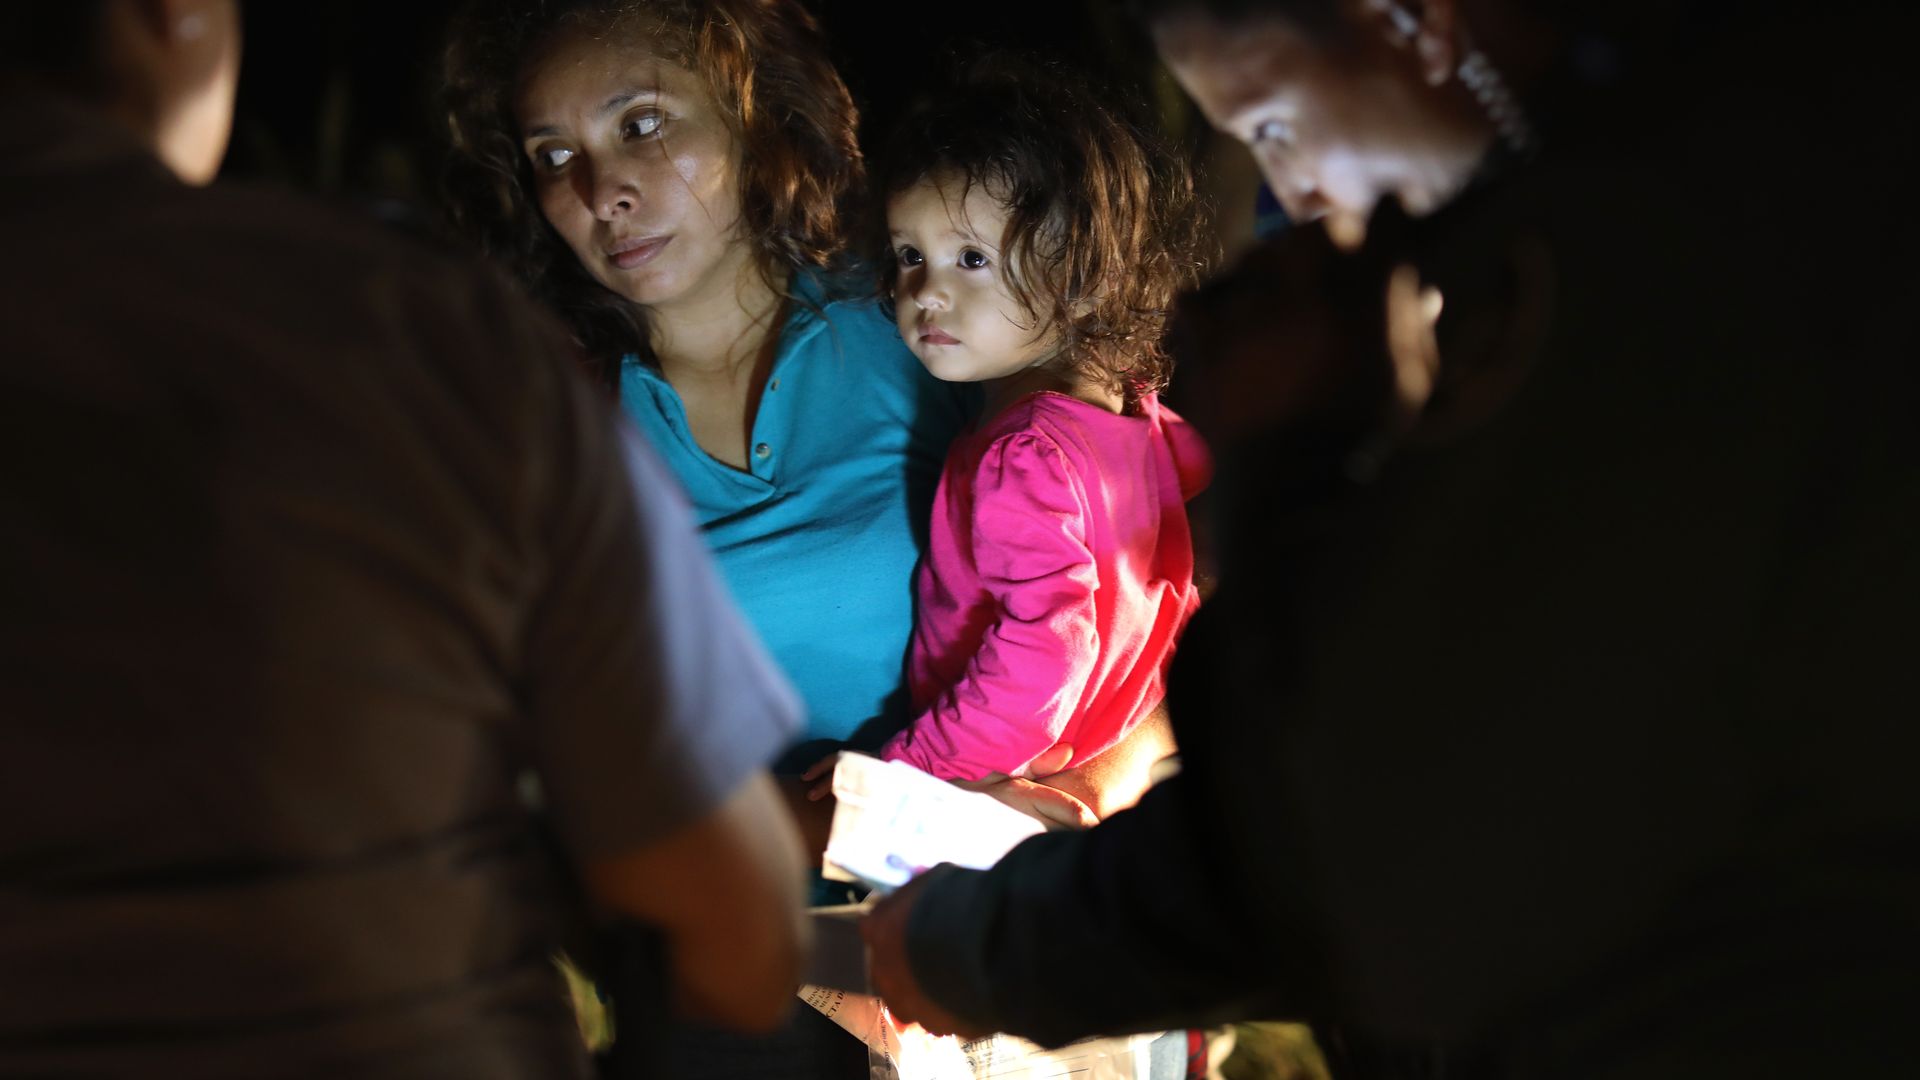 An immigrant holds her daughter while having paperwork looked at by immigration law enforcement officials